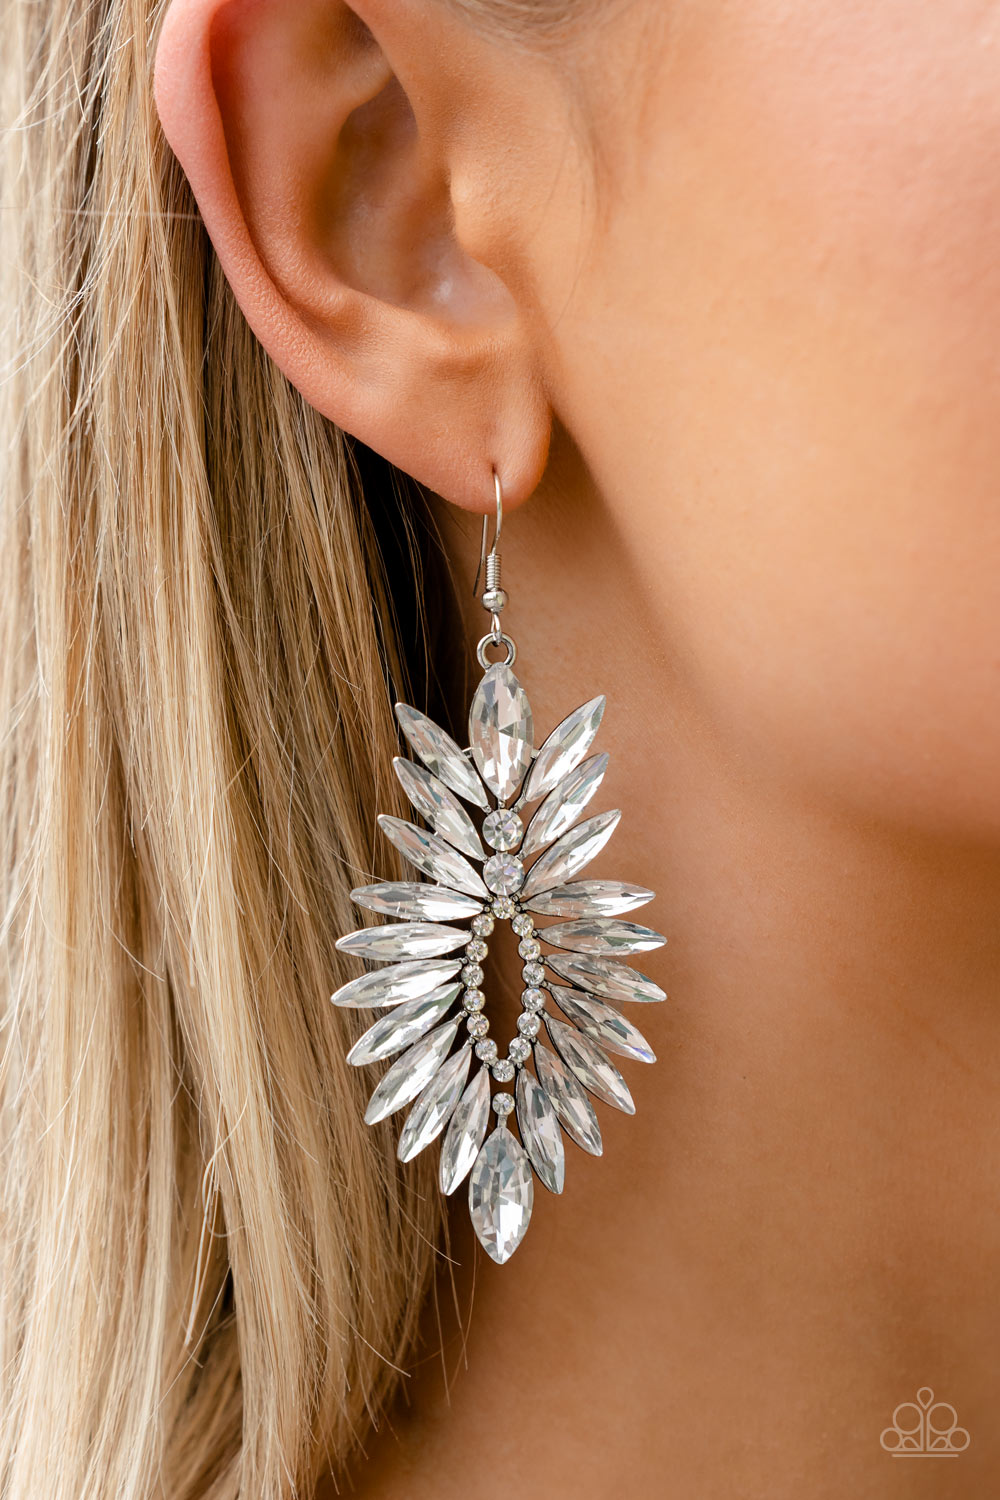 Turn up the Luxe - White Icy and Silver Fashion Earrings - Paparazzi Accessories - An explosion of white marquise rhinestones flares out from a ring of dainty white rhinestones, coalescing into an irresistibly icy statement piece. Earring attaches to a standard fishhook fitting. Sold as one pair of earrings.